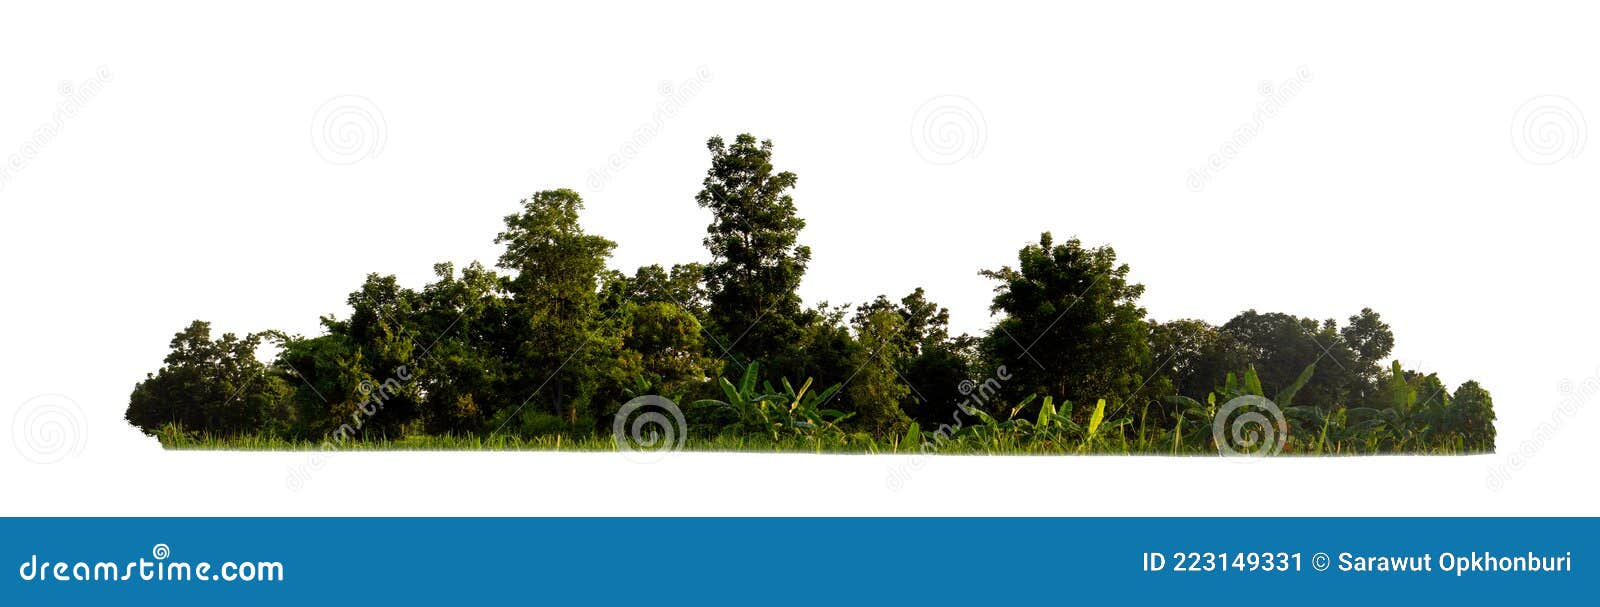 green trees  on white background. forest and leaves in summer rows of trees and bushes